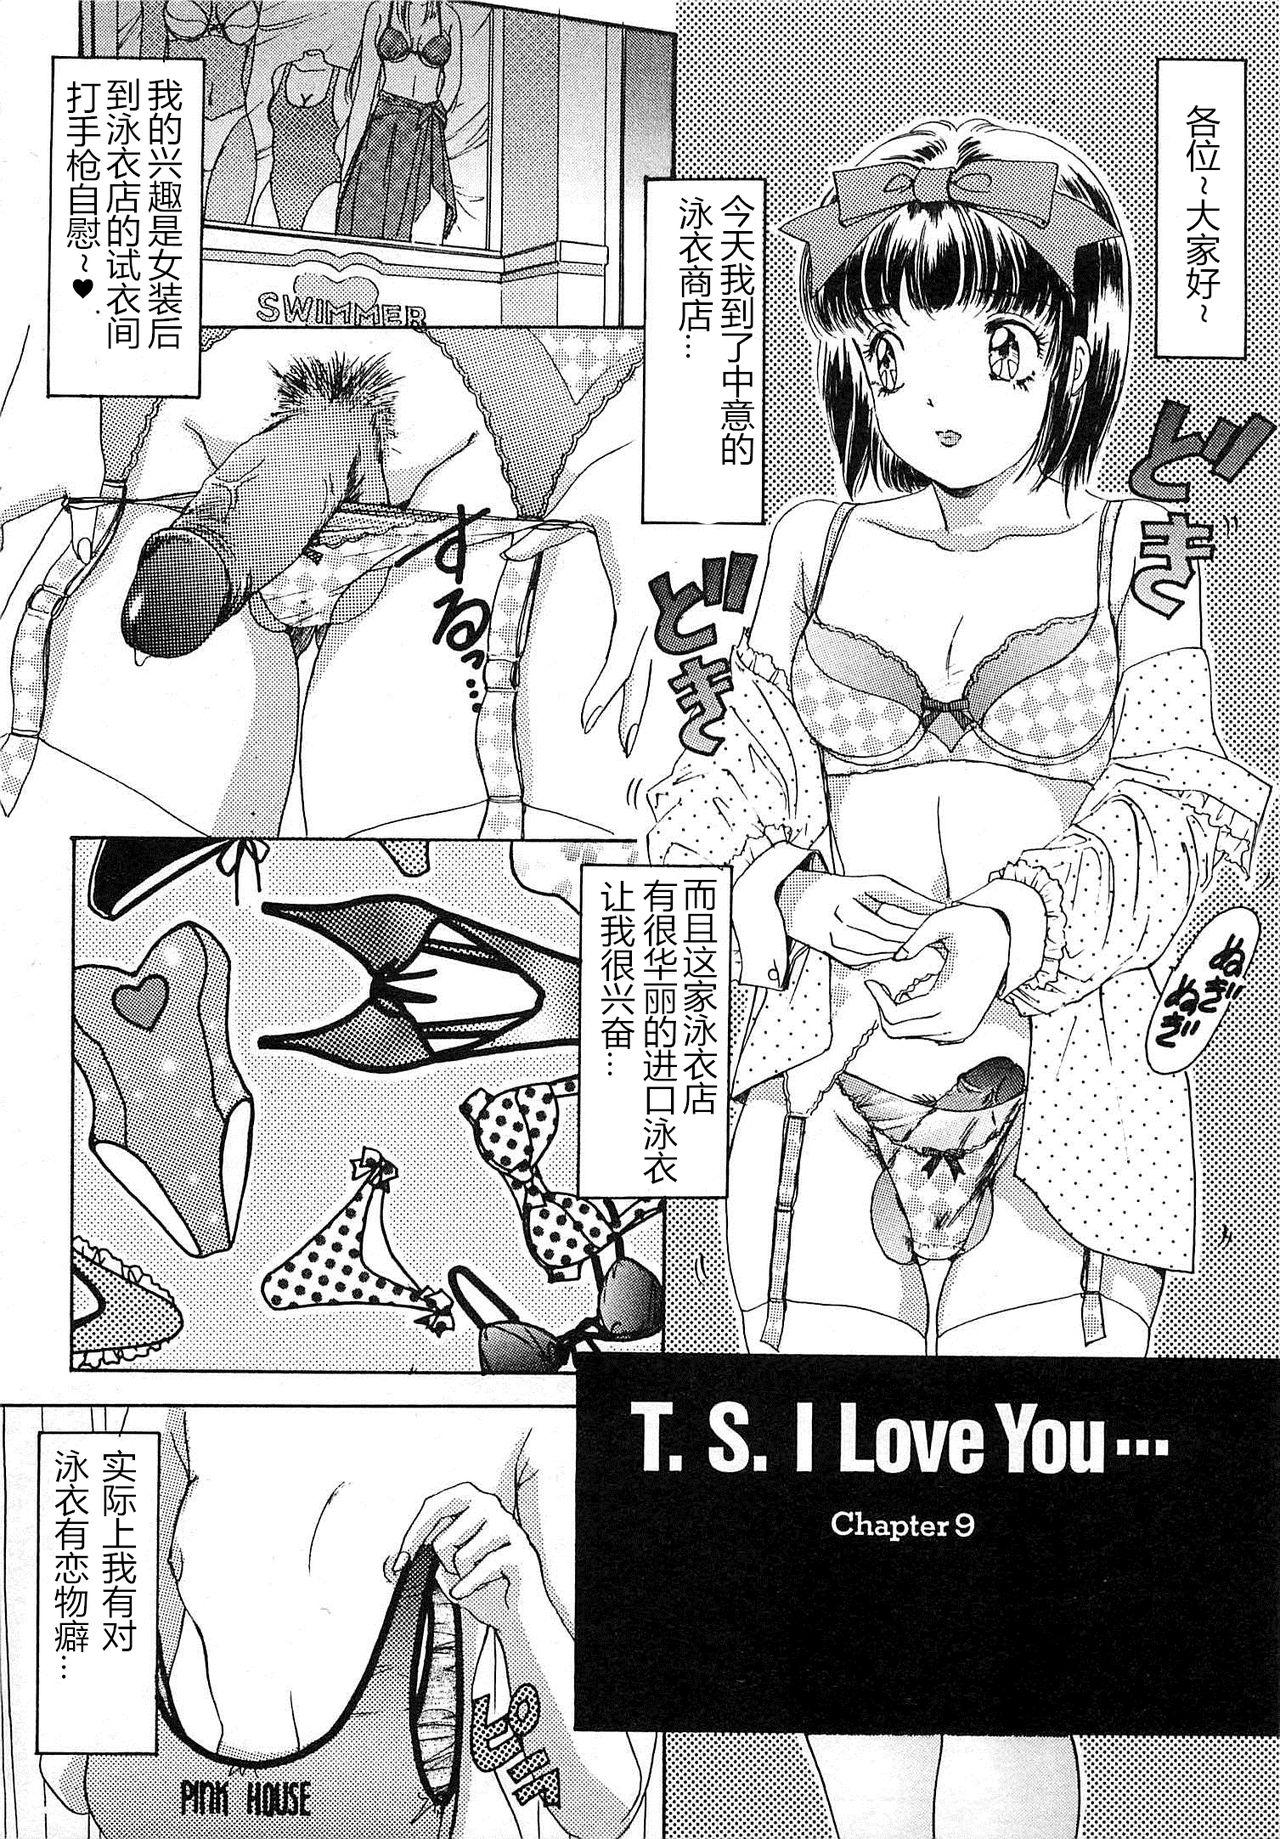 Fantasy T.S. I LOVE YOU chapter 09 Sweet - Page 2